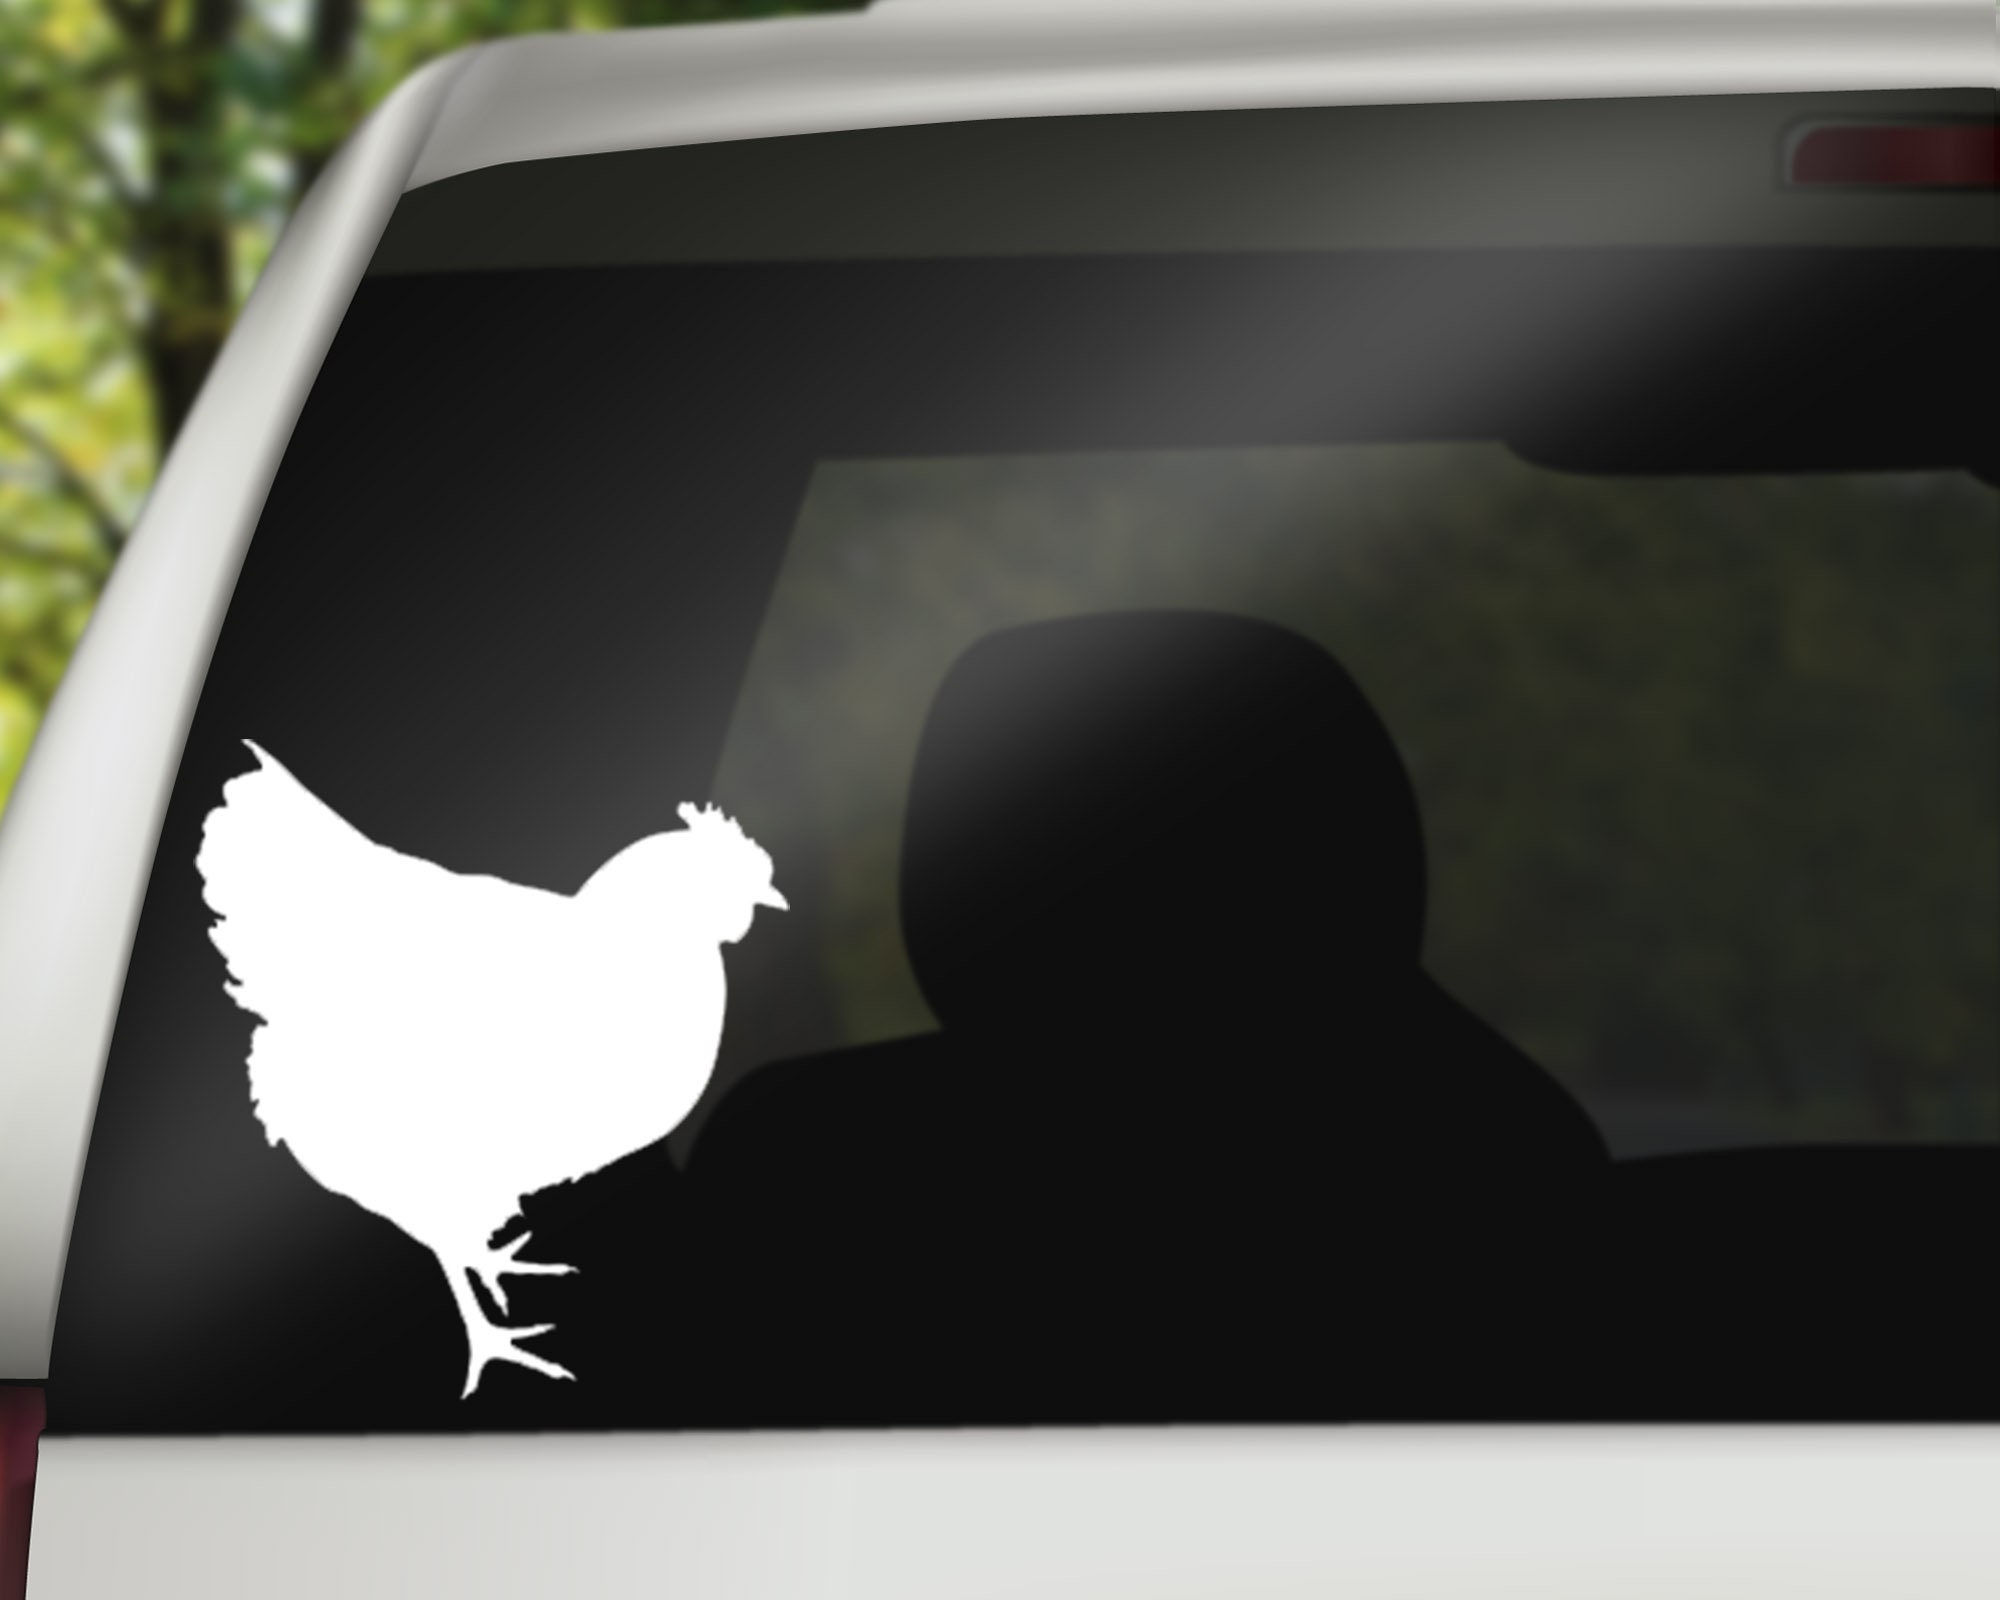 Windows Got Chickens Rooster Farm Vinyl Decal Sticker For Wall Decor C Laptop